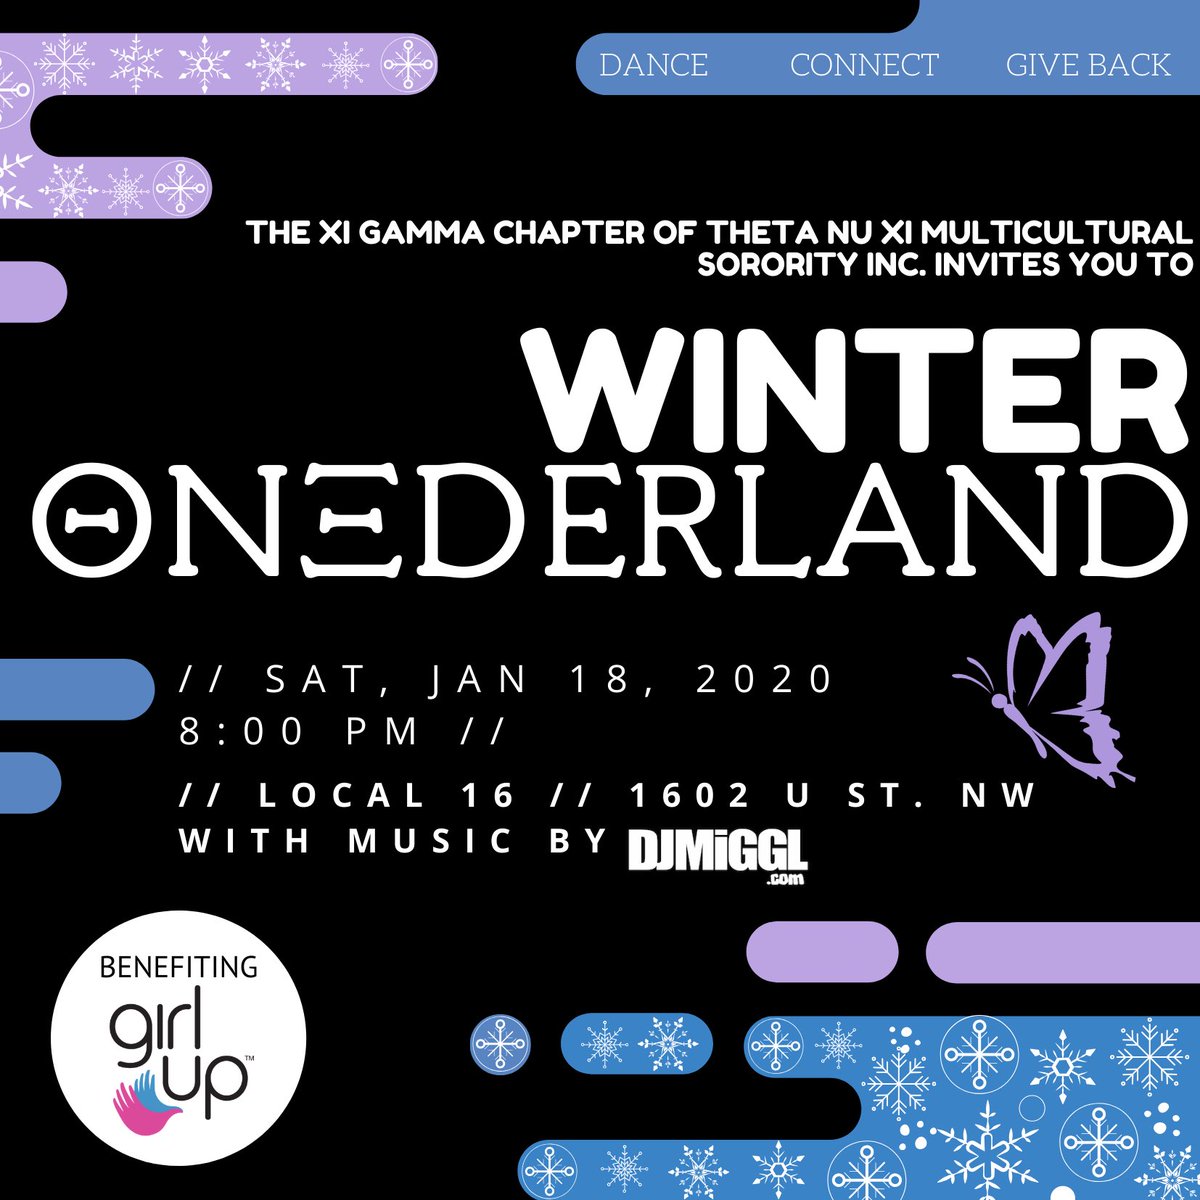 Make us part of your MLK weekend plans! Join the butterflies of the Xi Gamma chapter on Saturday 1/18 for a night of fun, connecting & giving back. Event details/specials/additional information: facebook.com/events/3216239…. We hope to see you there! ❄️ #ustreetdc #dcnightlife